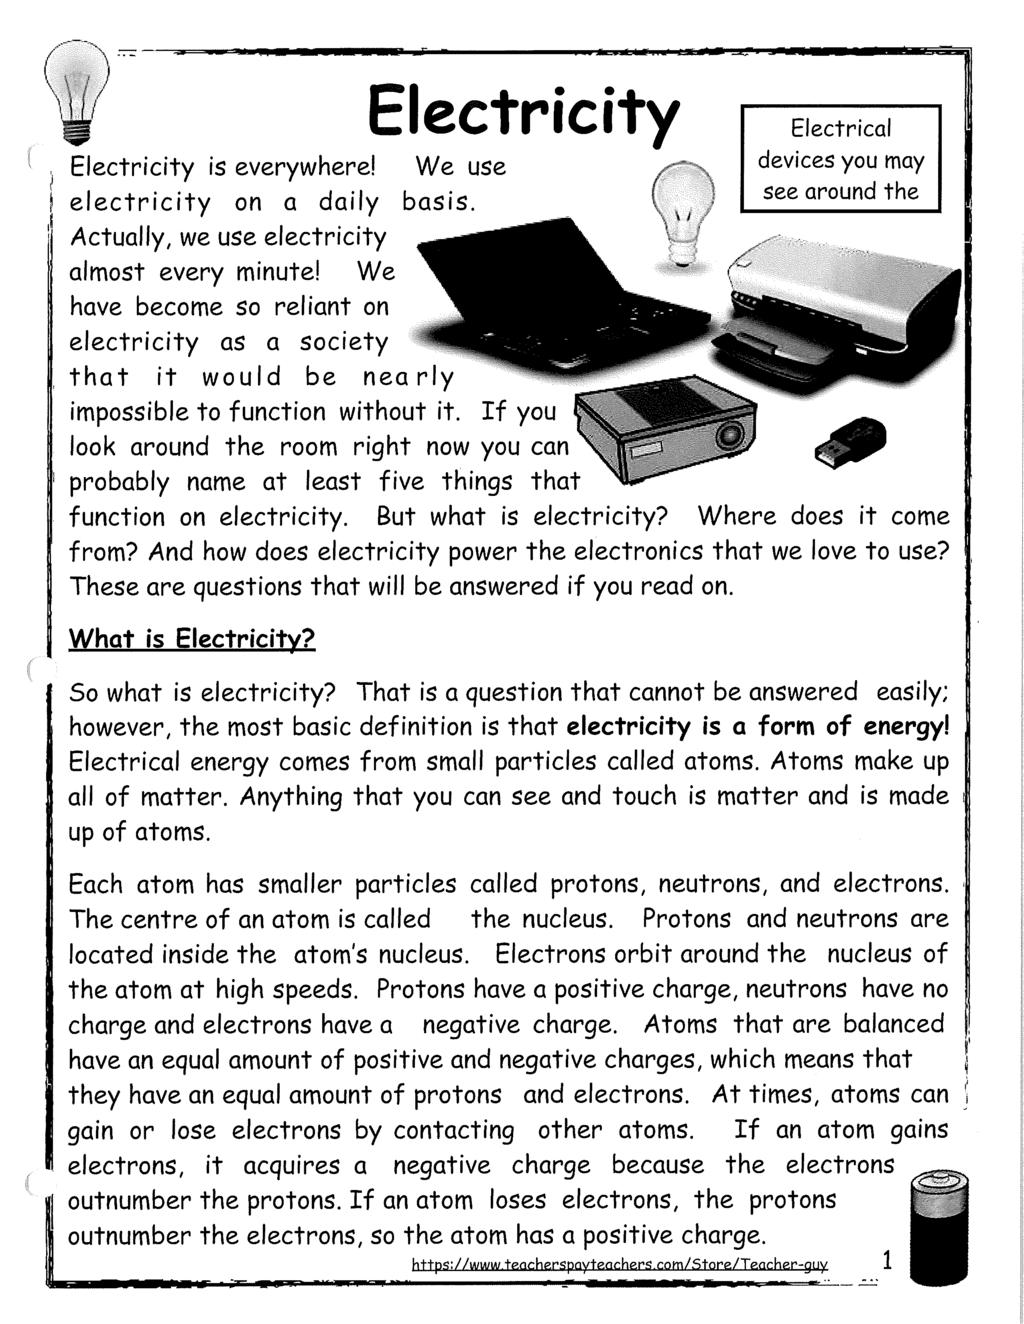 3 ) " / Electricity Electrical devices you may Electricity is everywhere! We use see around the e le c tric ity on a daily basis. Actually, we use electricity almost every minute!